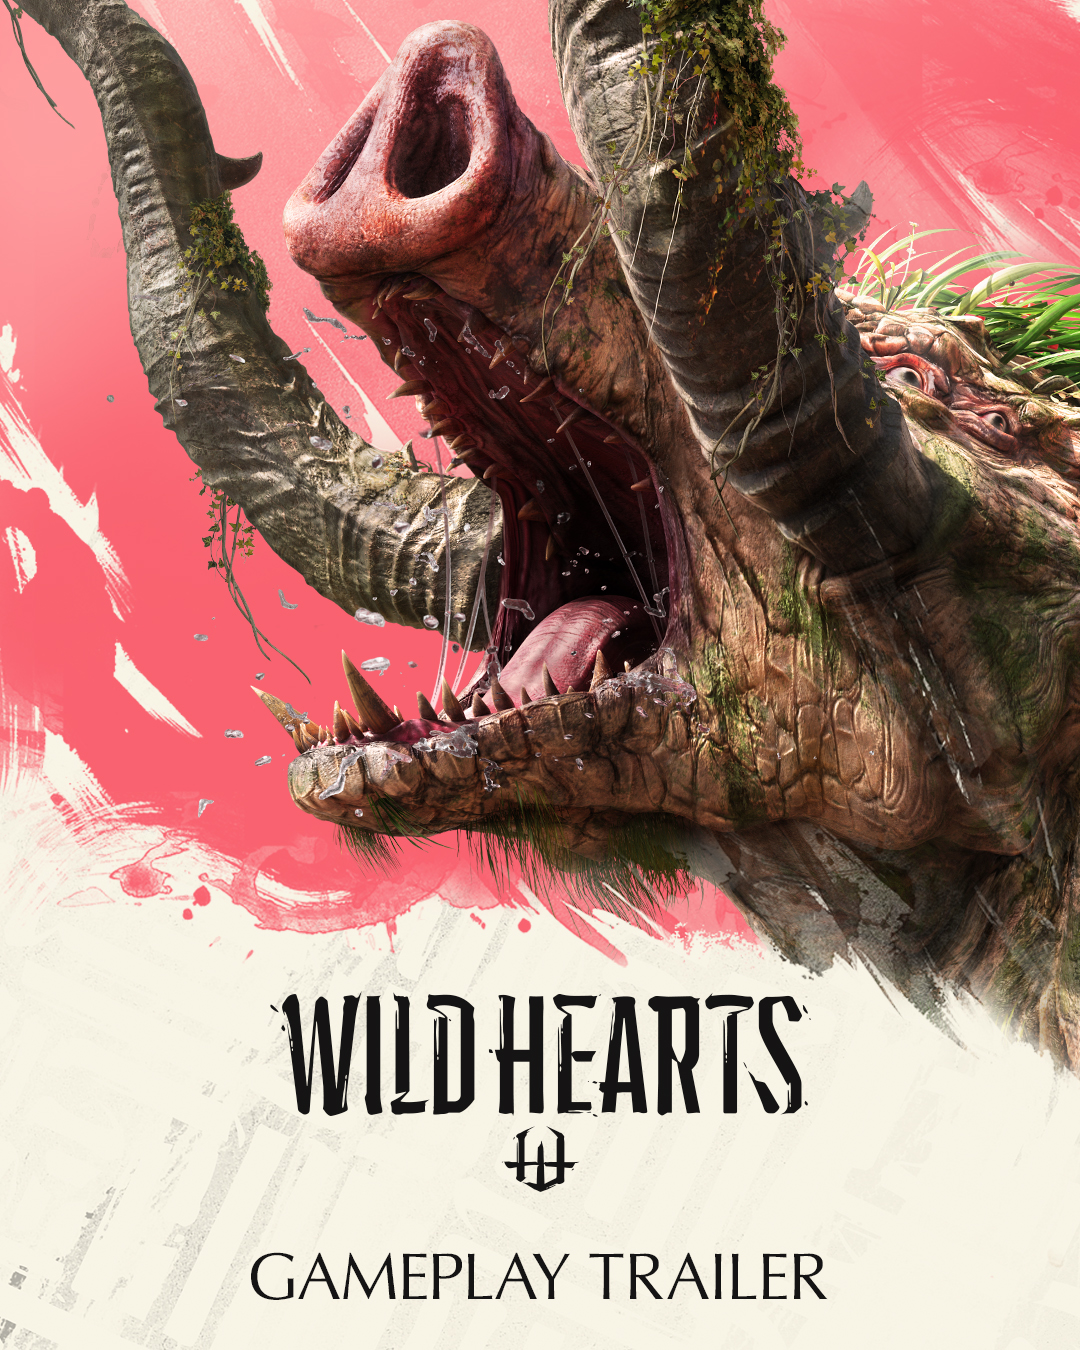 WILD HEARTS on X: Brace for the Kingtusk's charge! 🐗 Experience